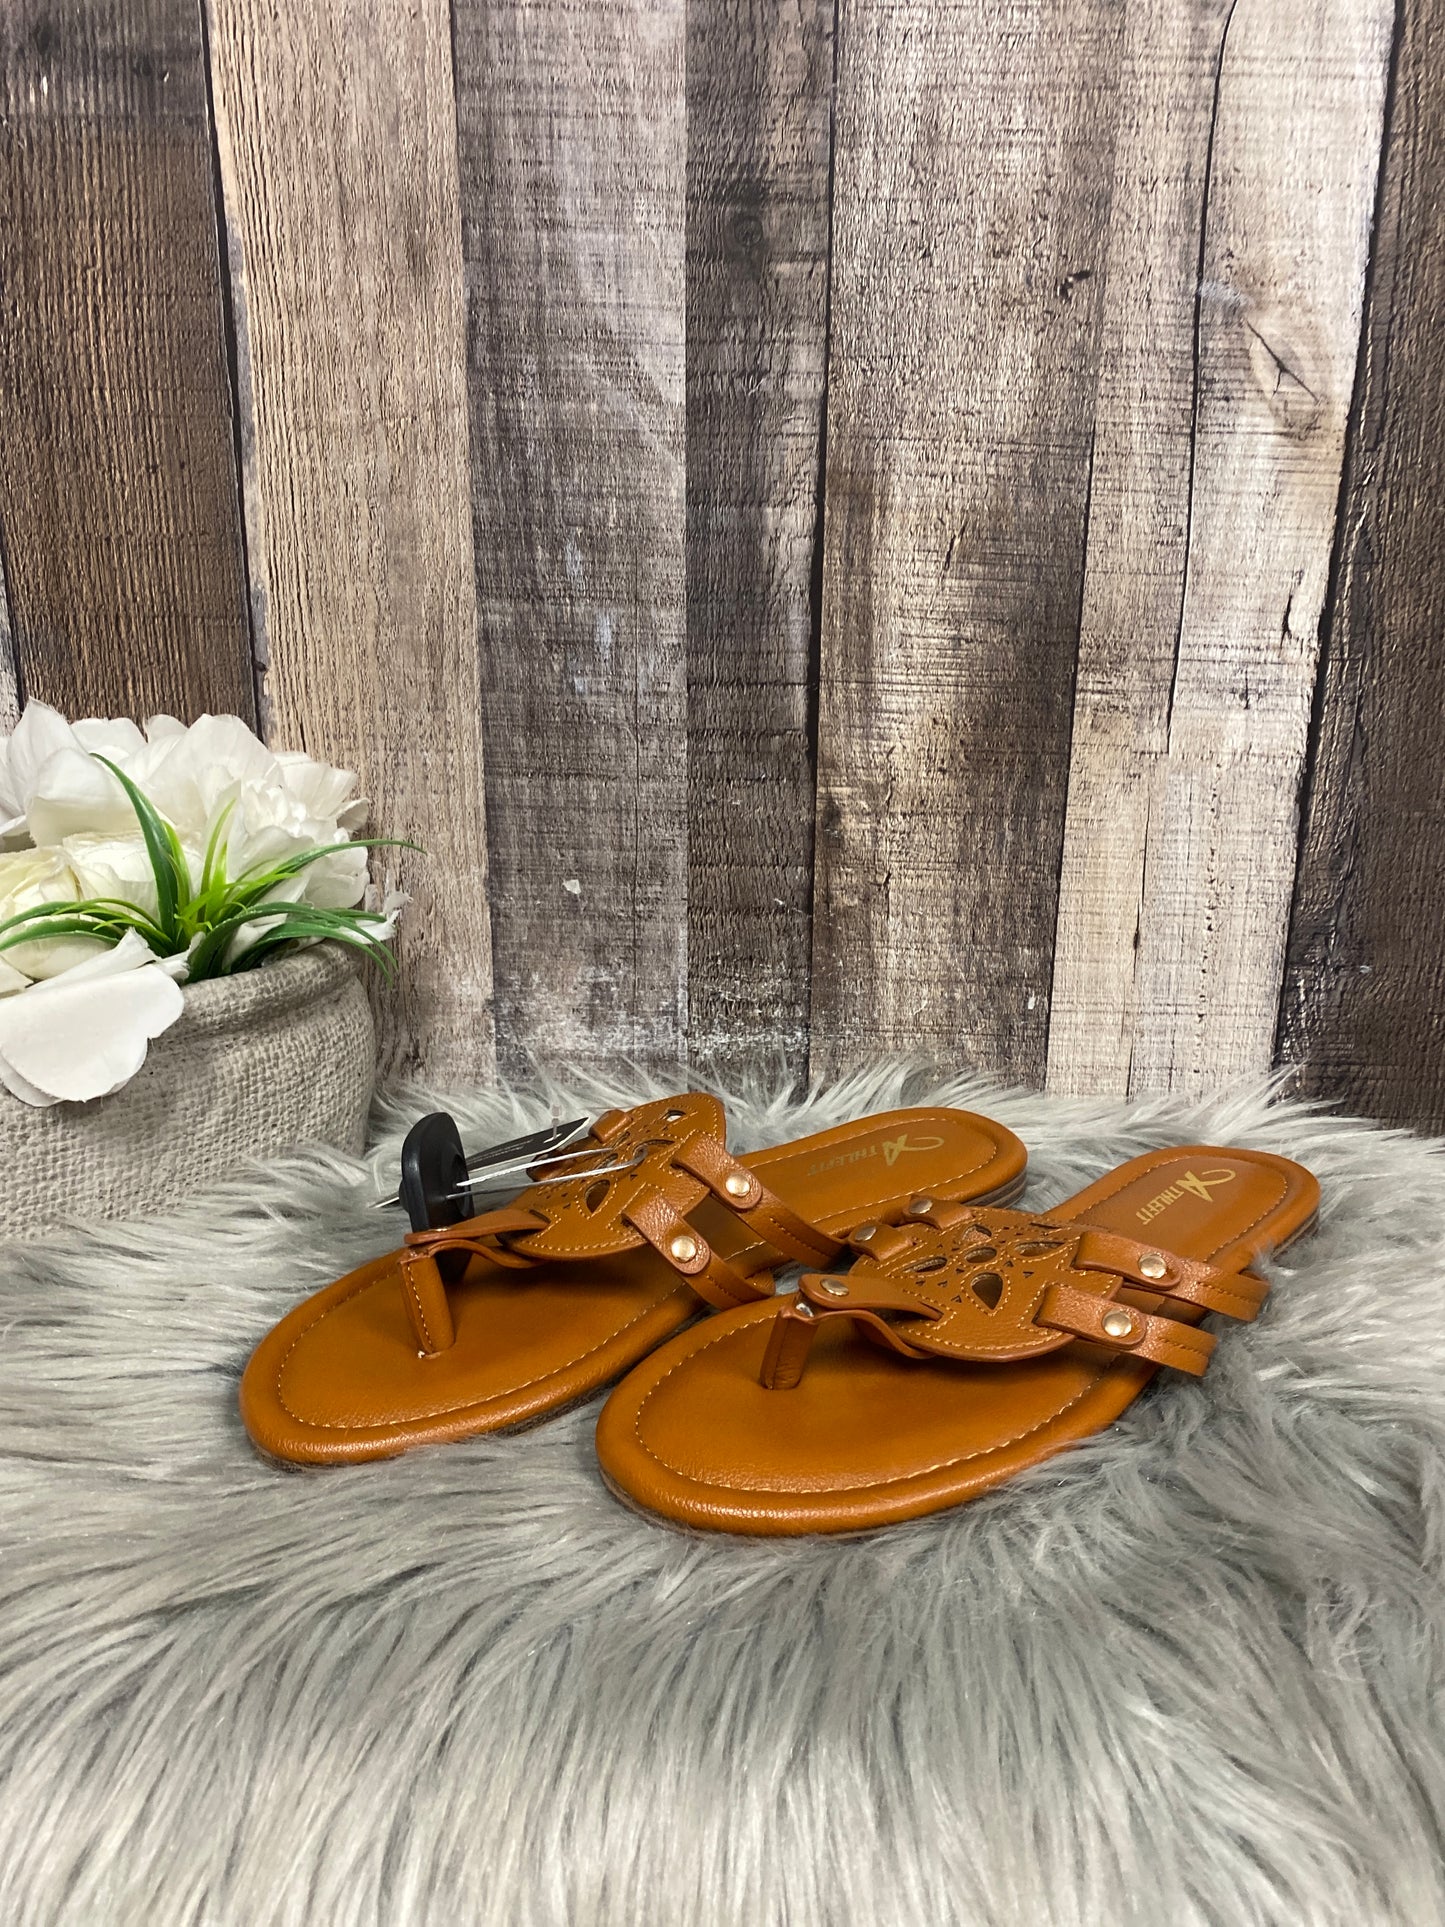 Sandals Flats By Cme  Size: 7.5